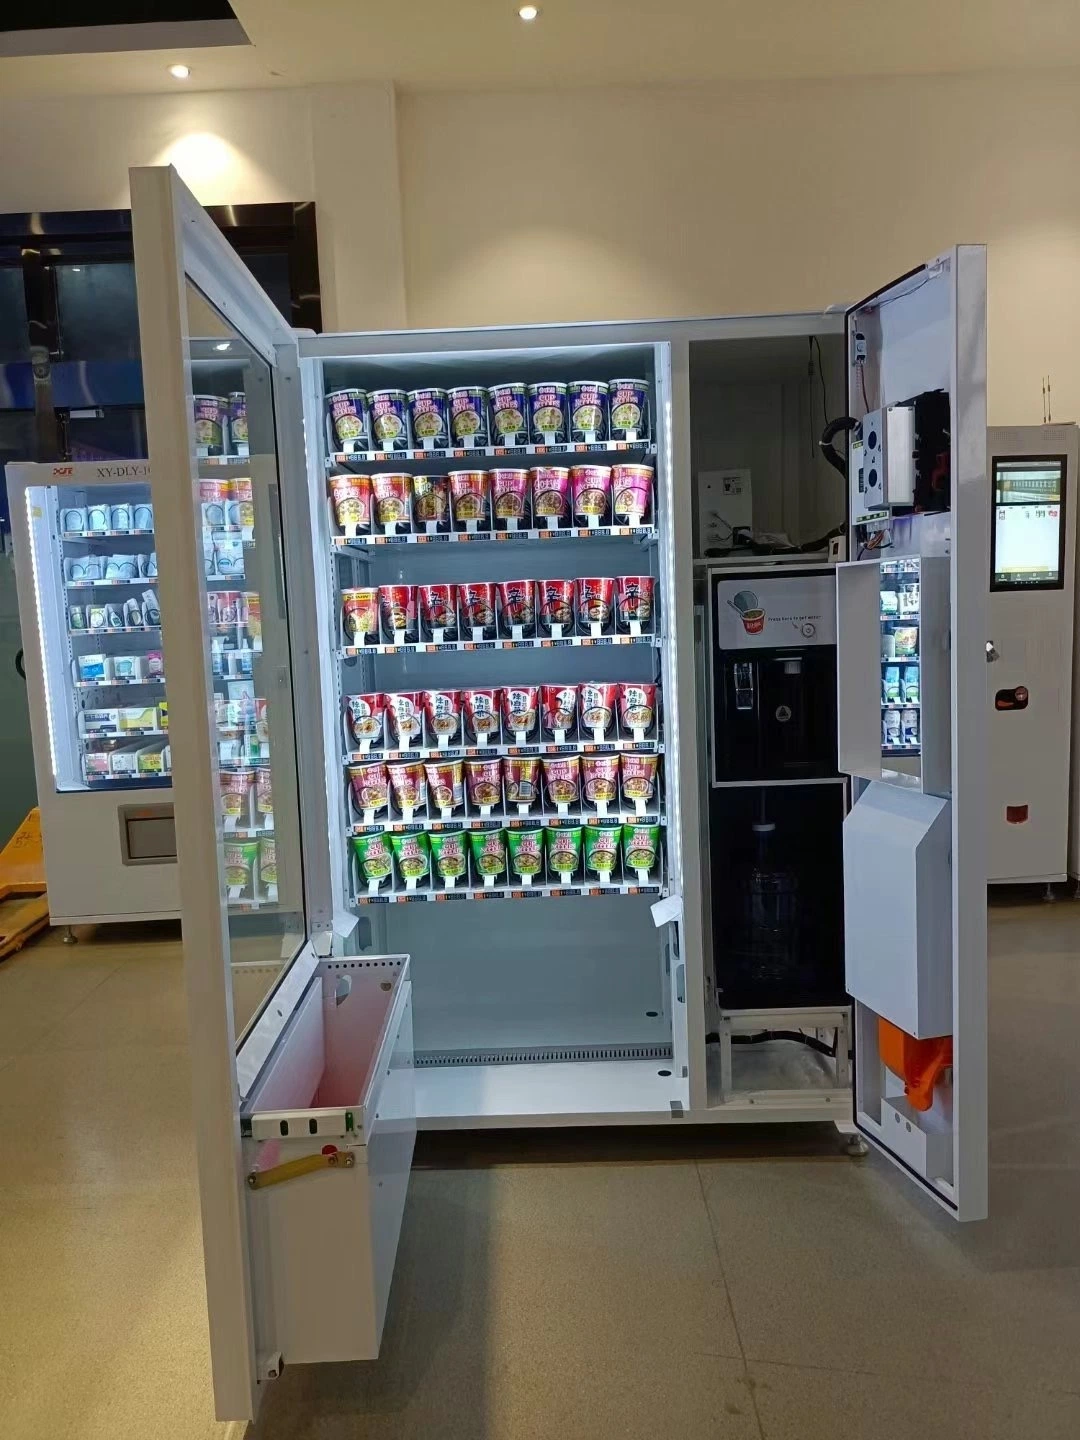 Cup Noodle Vending Machine with Hot Water Dispenser